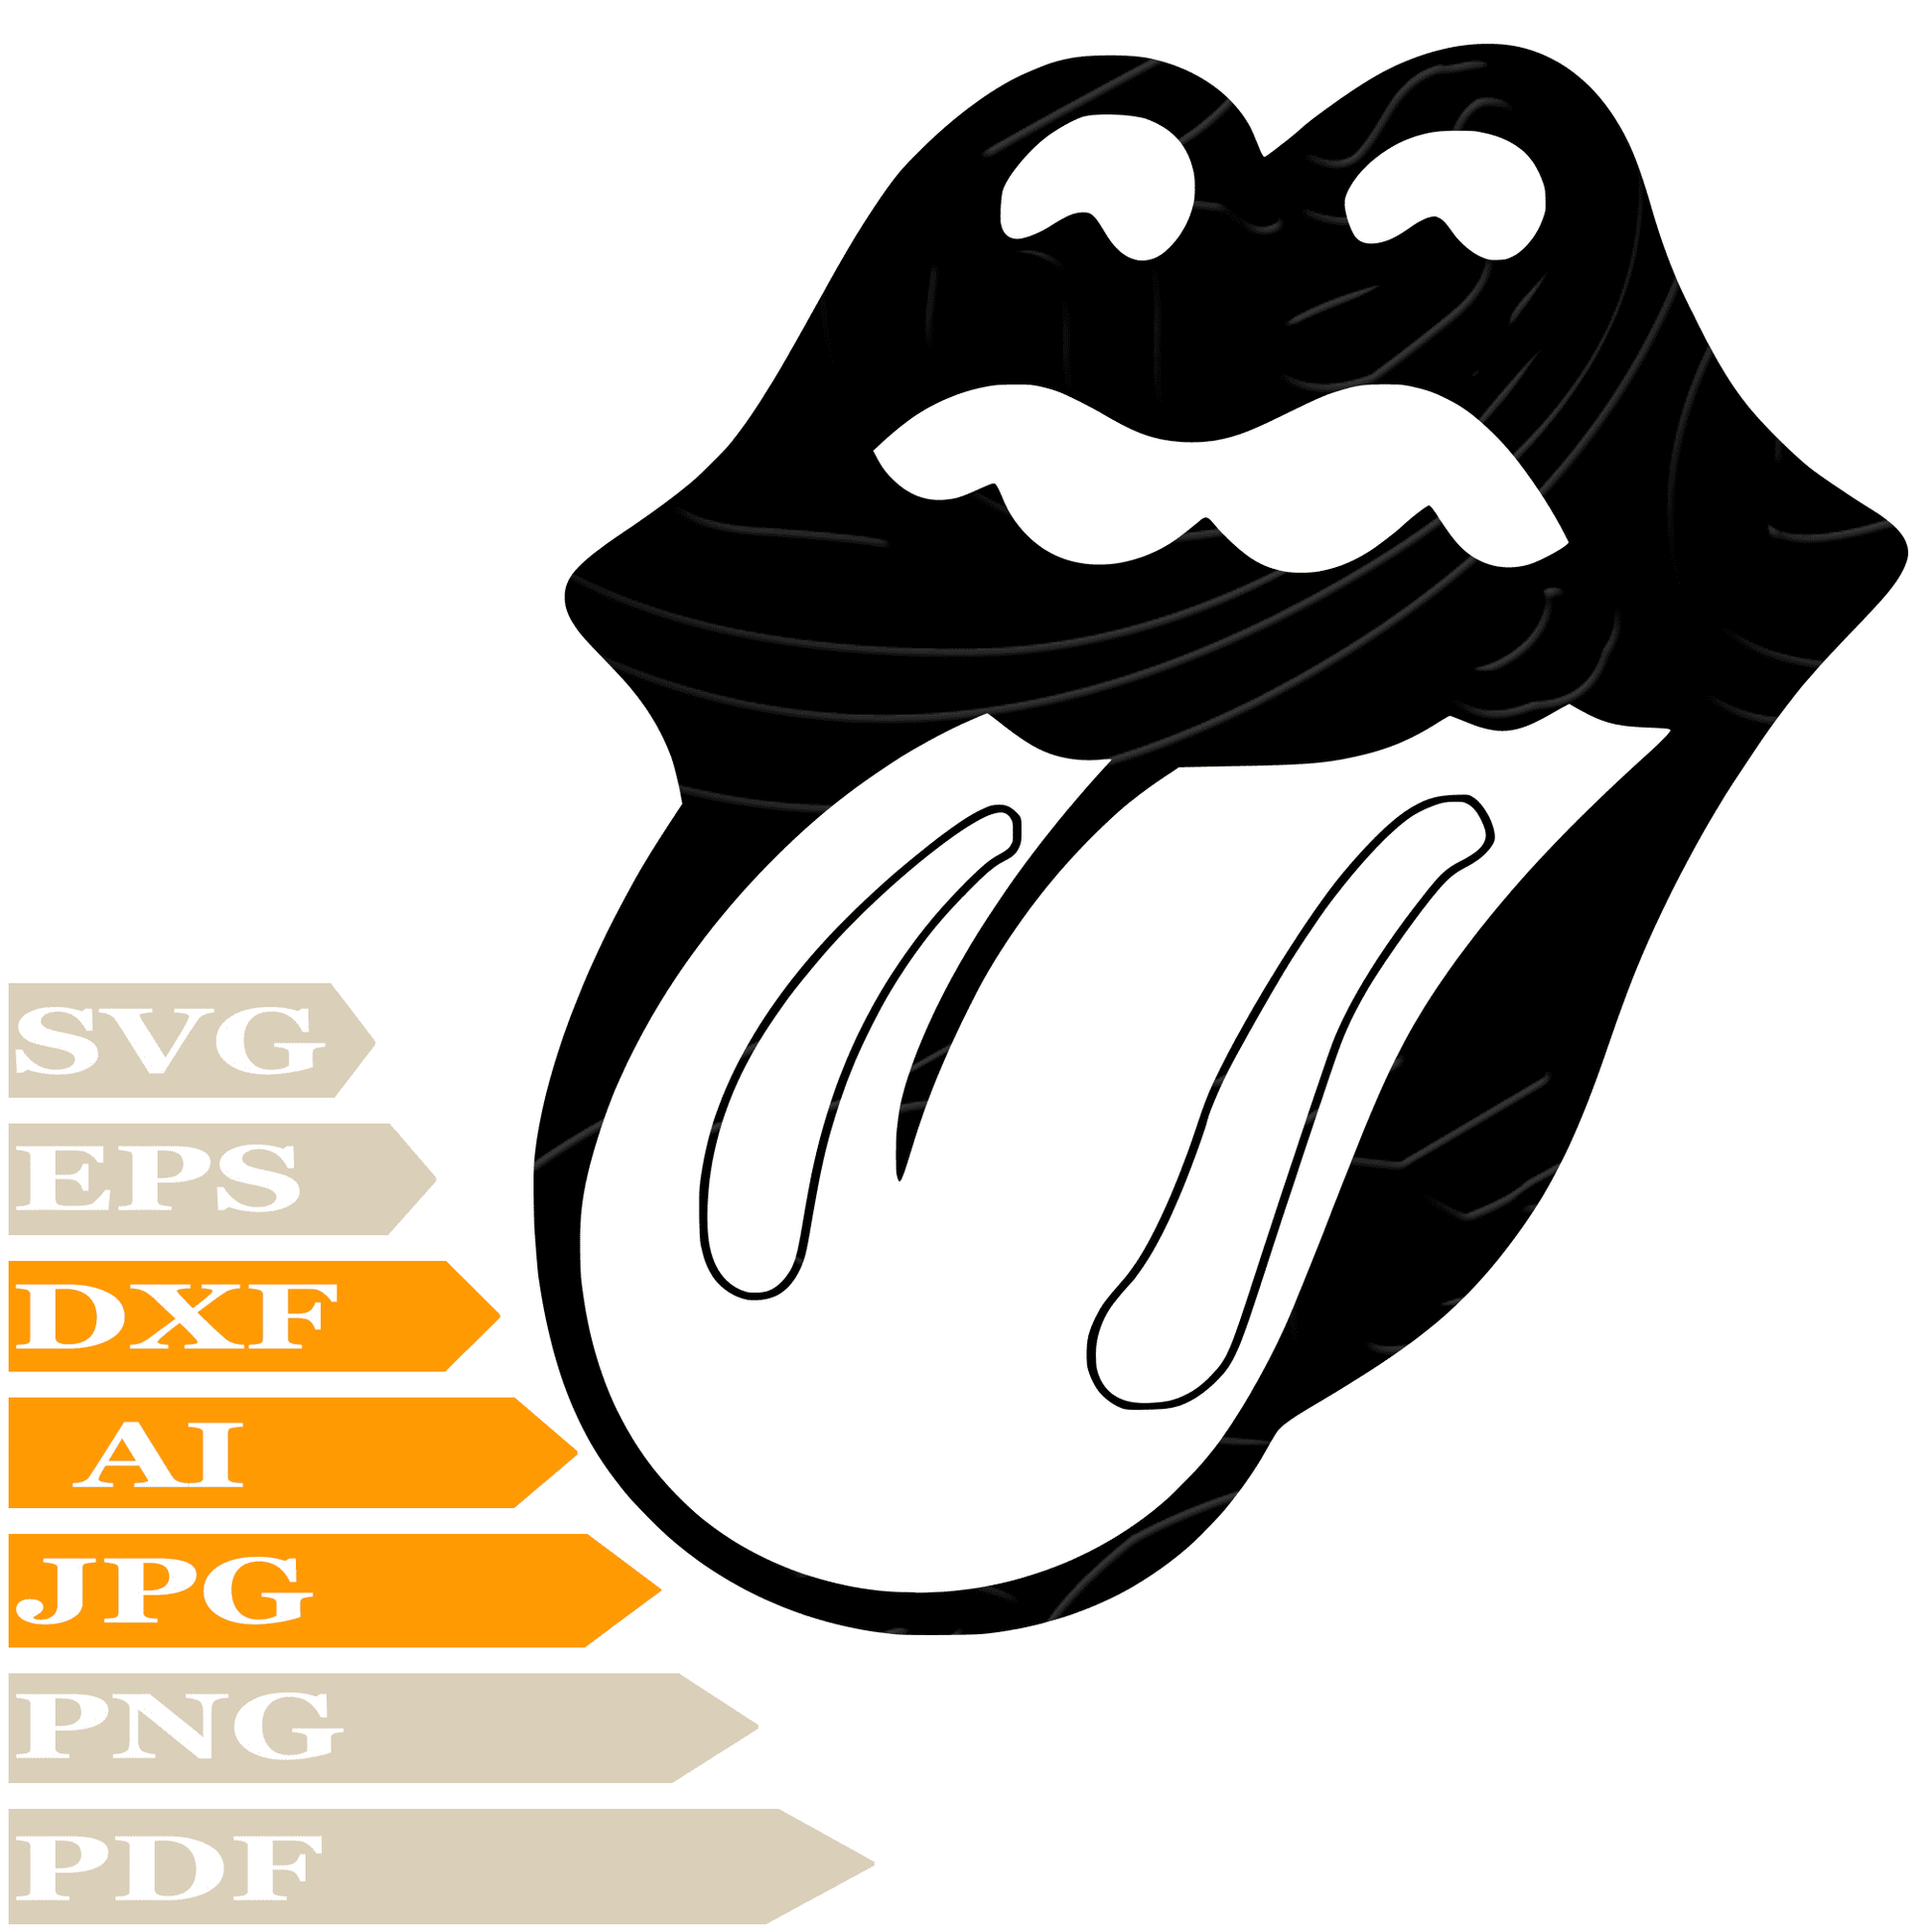 The Rolling Stones SVG-Rolling Stones Personalized SVG-The Rolling Stones Logo Drawing SVG-Music Band The Rolling Stones Logo Vector Illustration-PNG-Decal-Cricut-Digital Files-Clip Art-Cut File-For Shirts-Silhouette